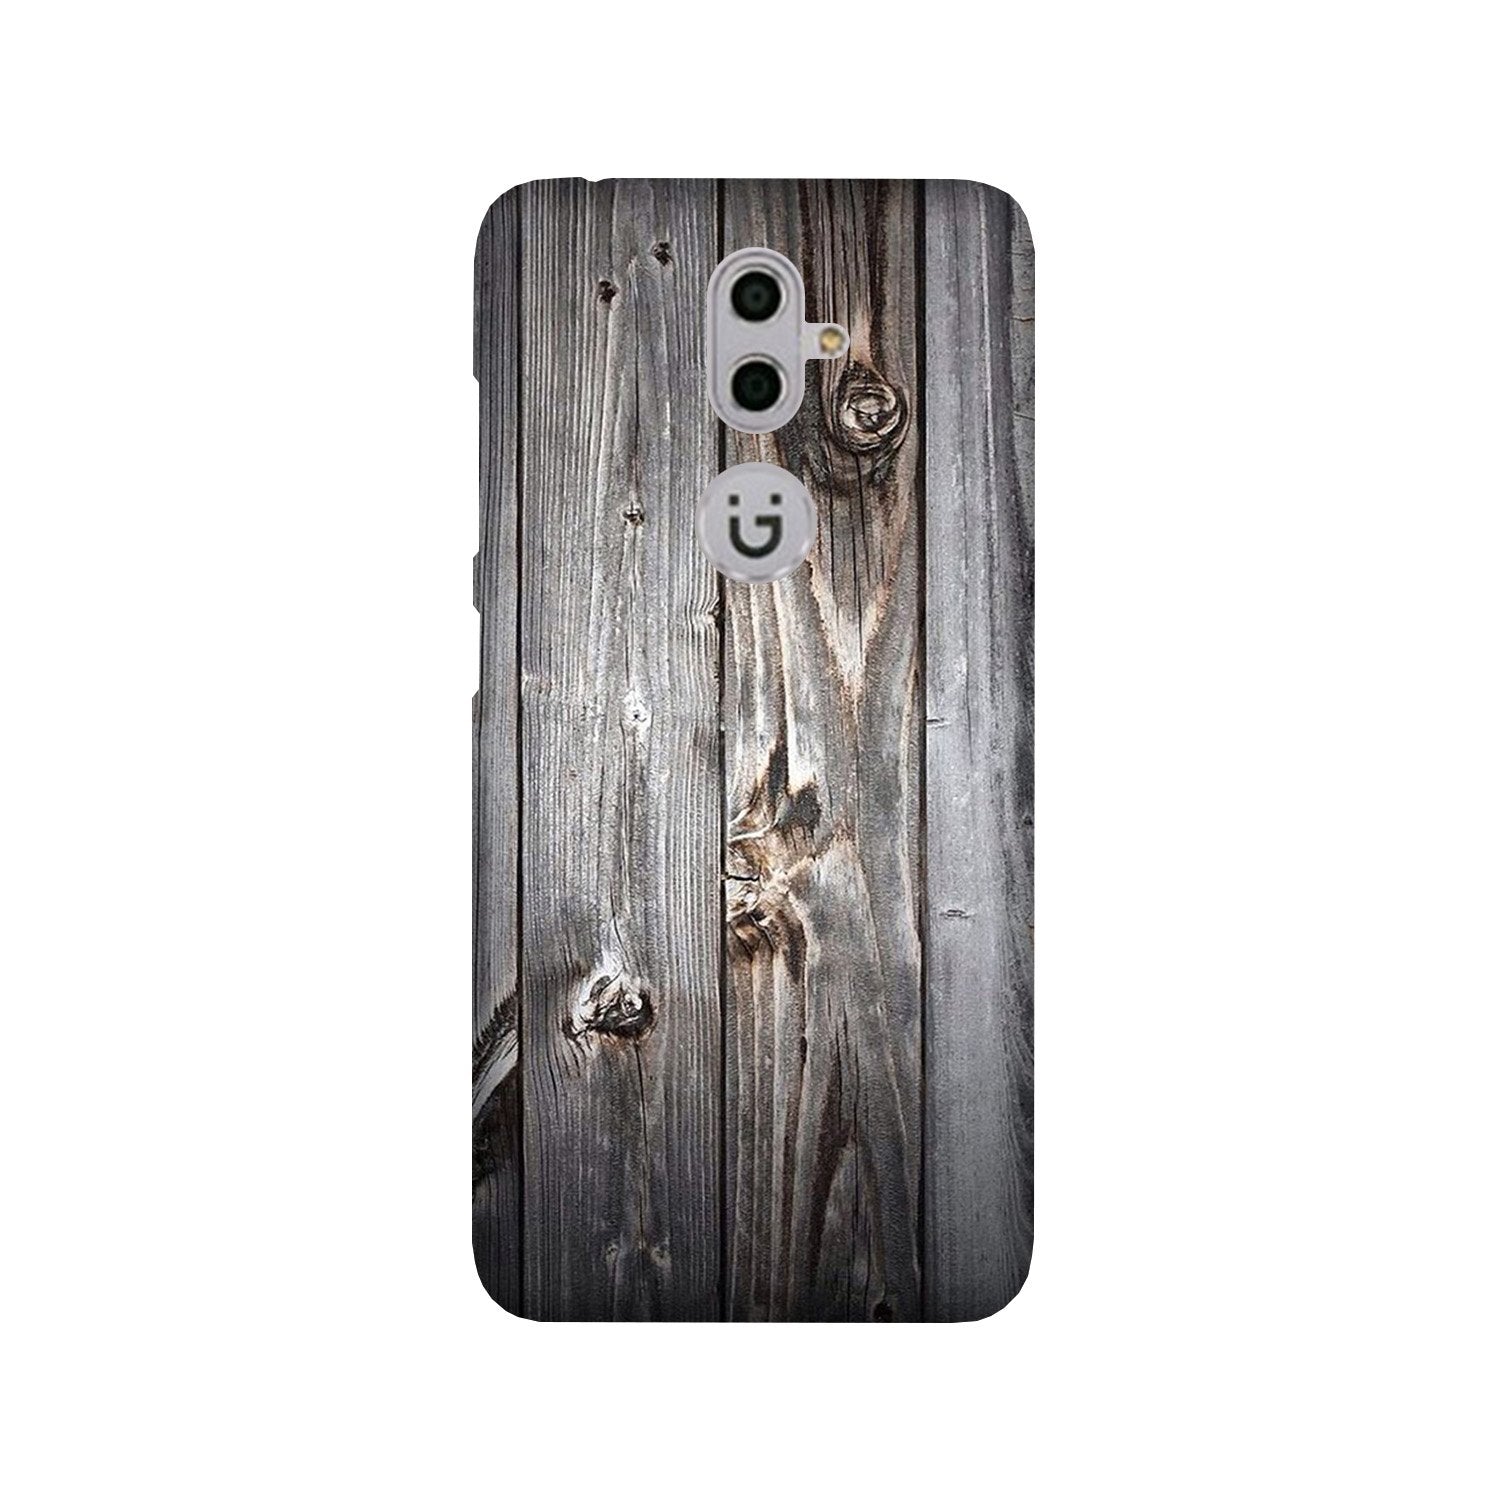 Wooden Look Case for Gionee S9(Design - 114)